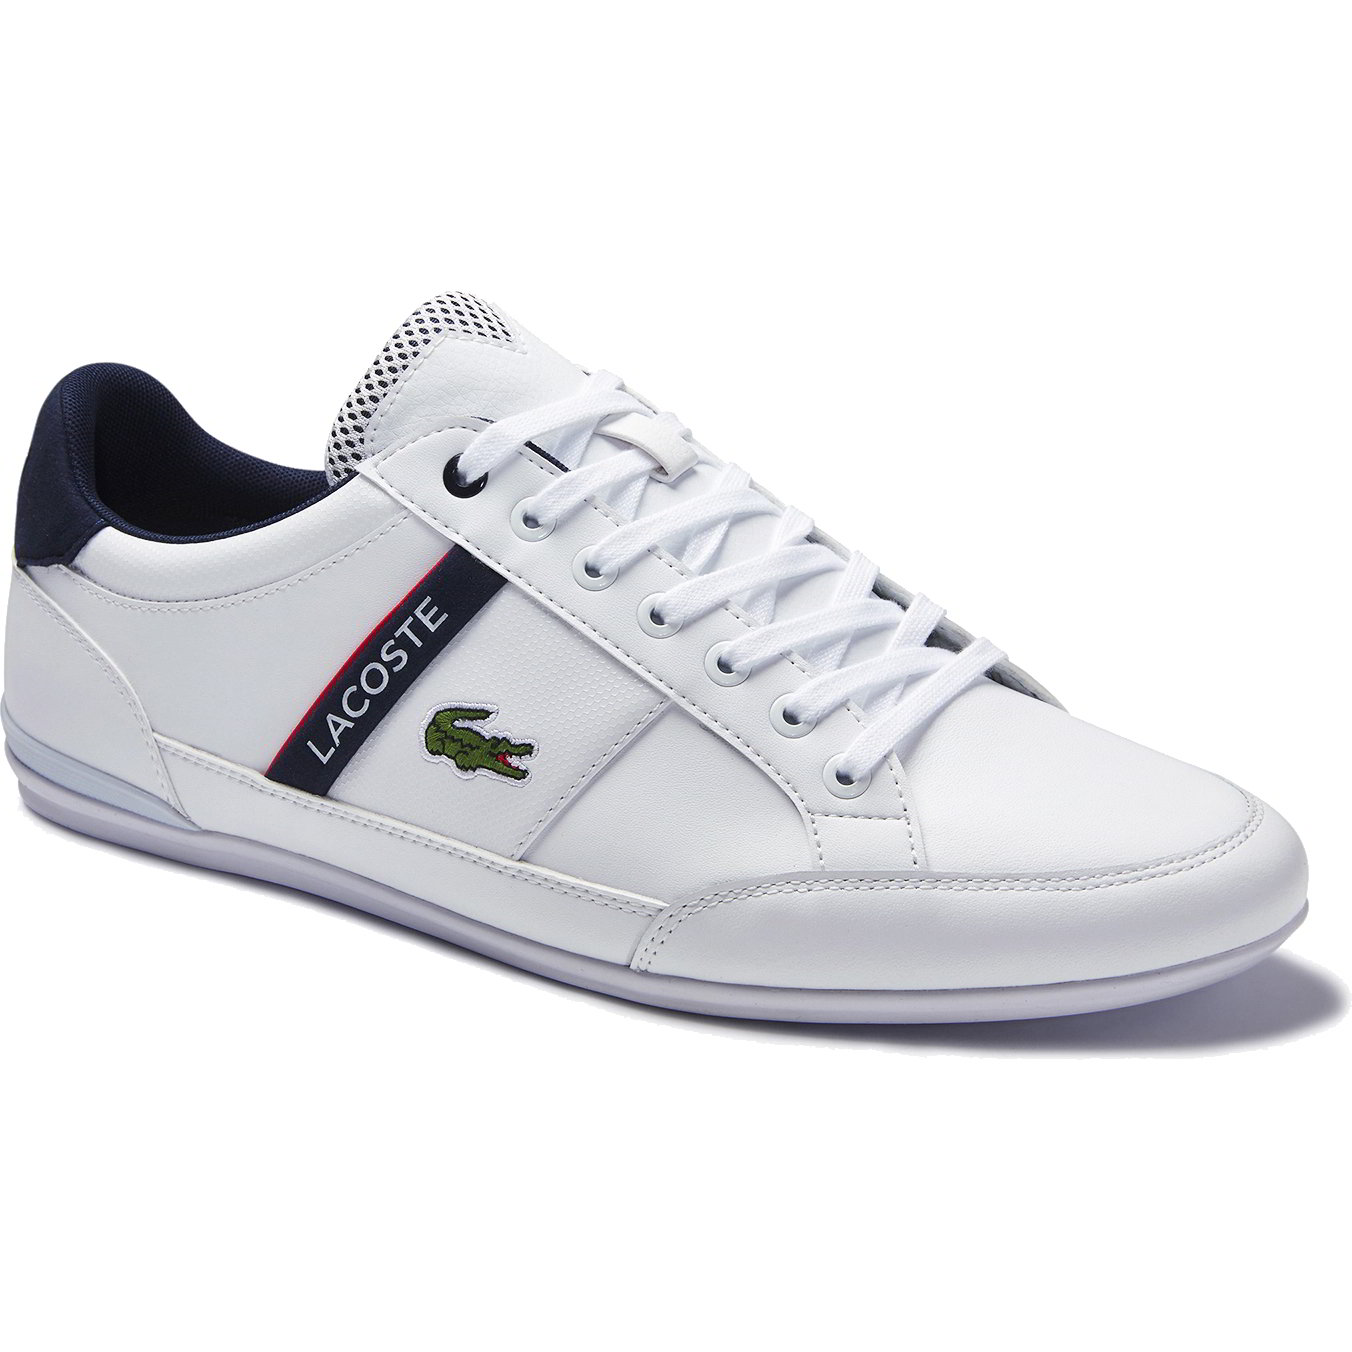 Lacoste Mens Chaymon 120 Trainers - White Navy Red 2951